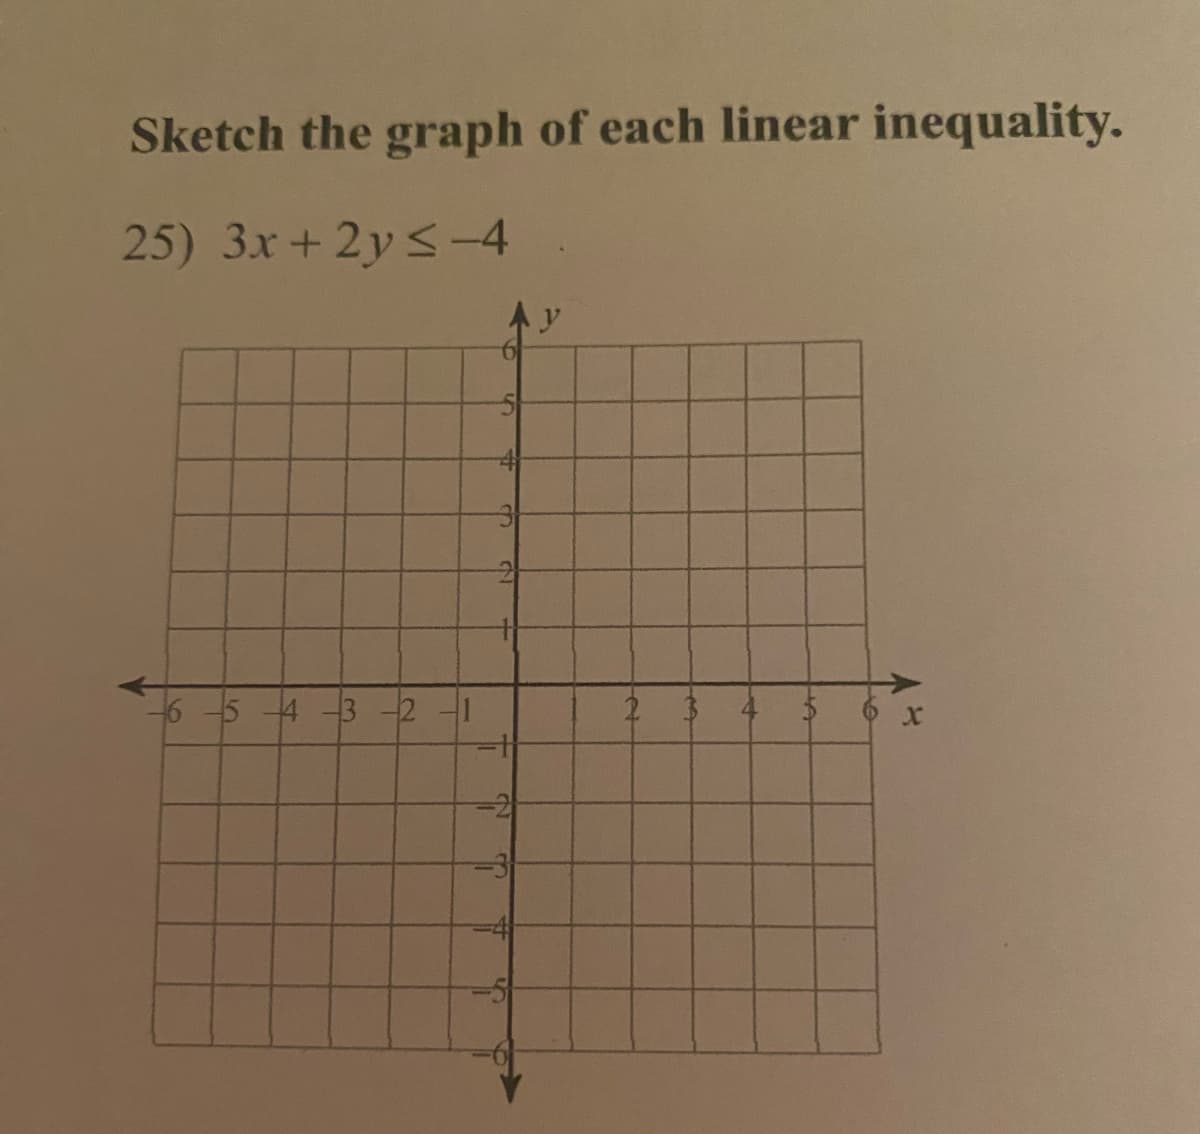 Sketch the graph of each linear inequality.
25) 3x + 2y ≤-4
6 5 4 3 -2 -1
2
6 X